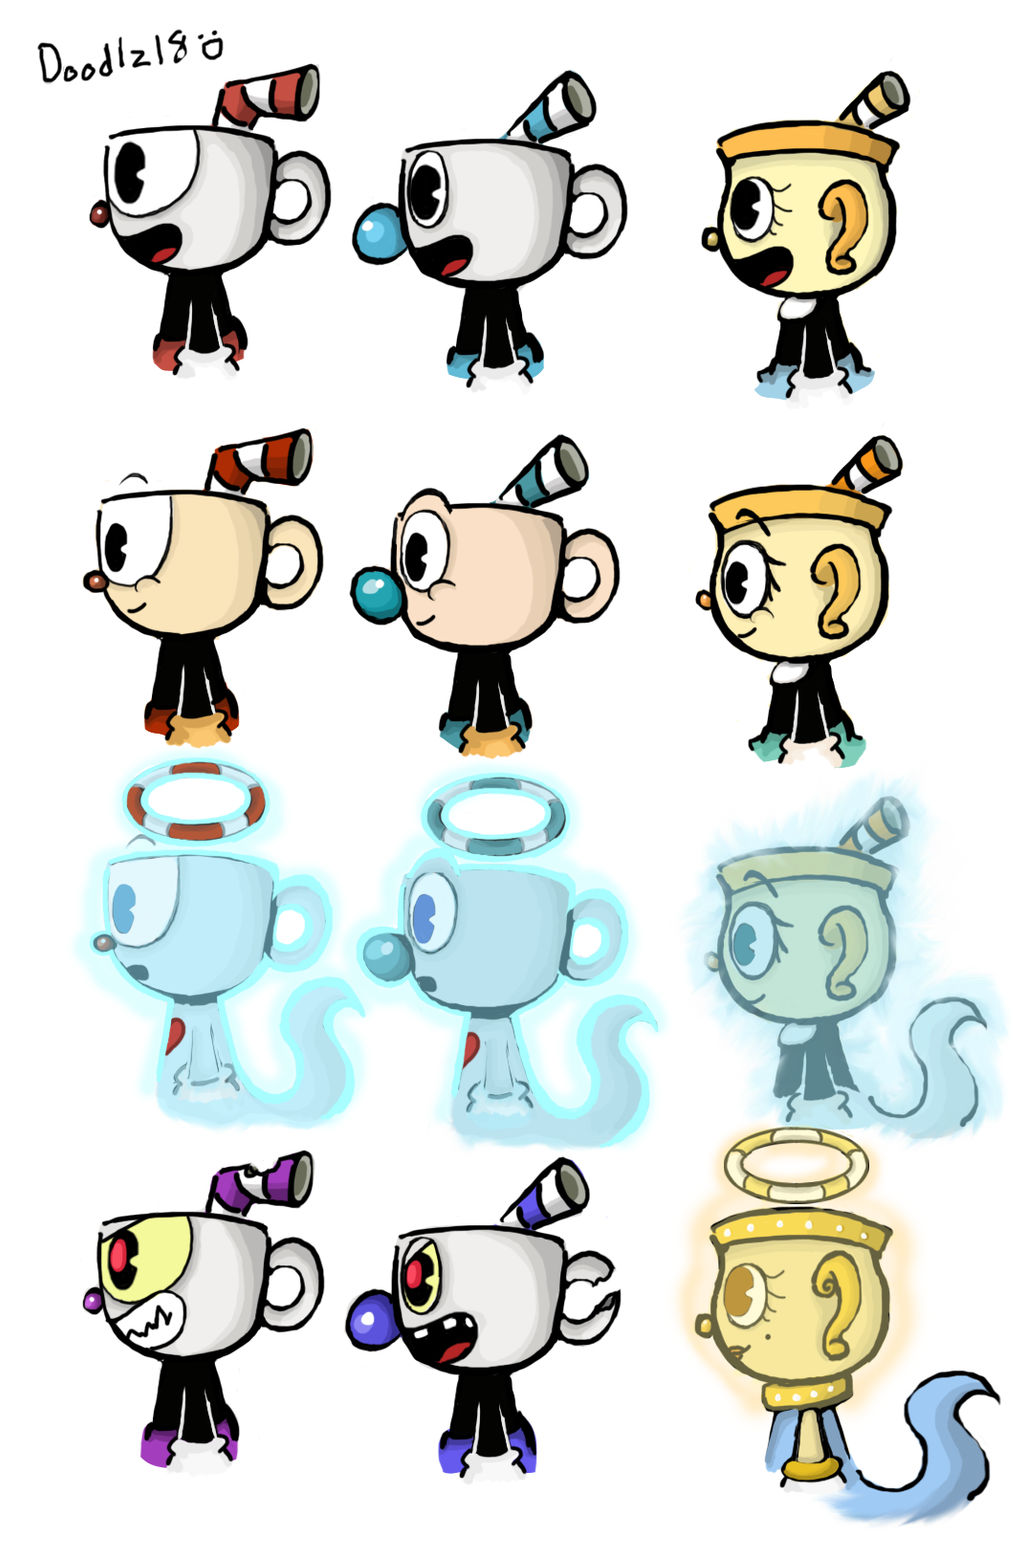 The Cuphead Trio_Side View by Doodlz18 on DeviantArt